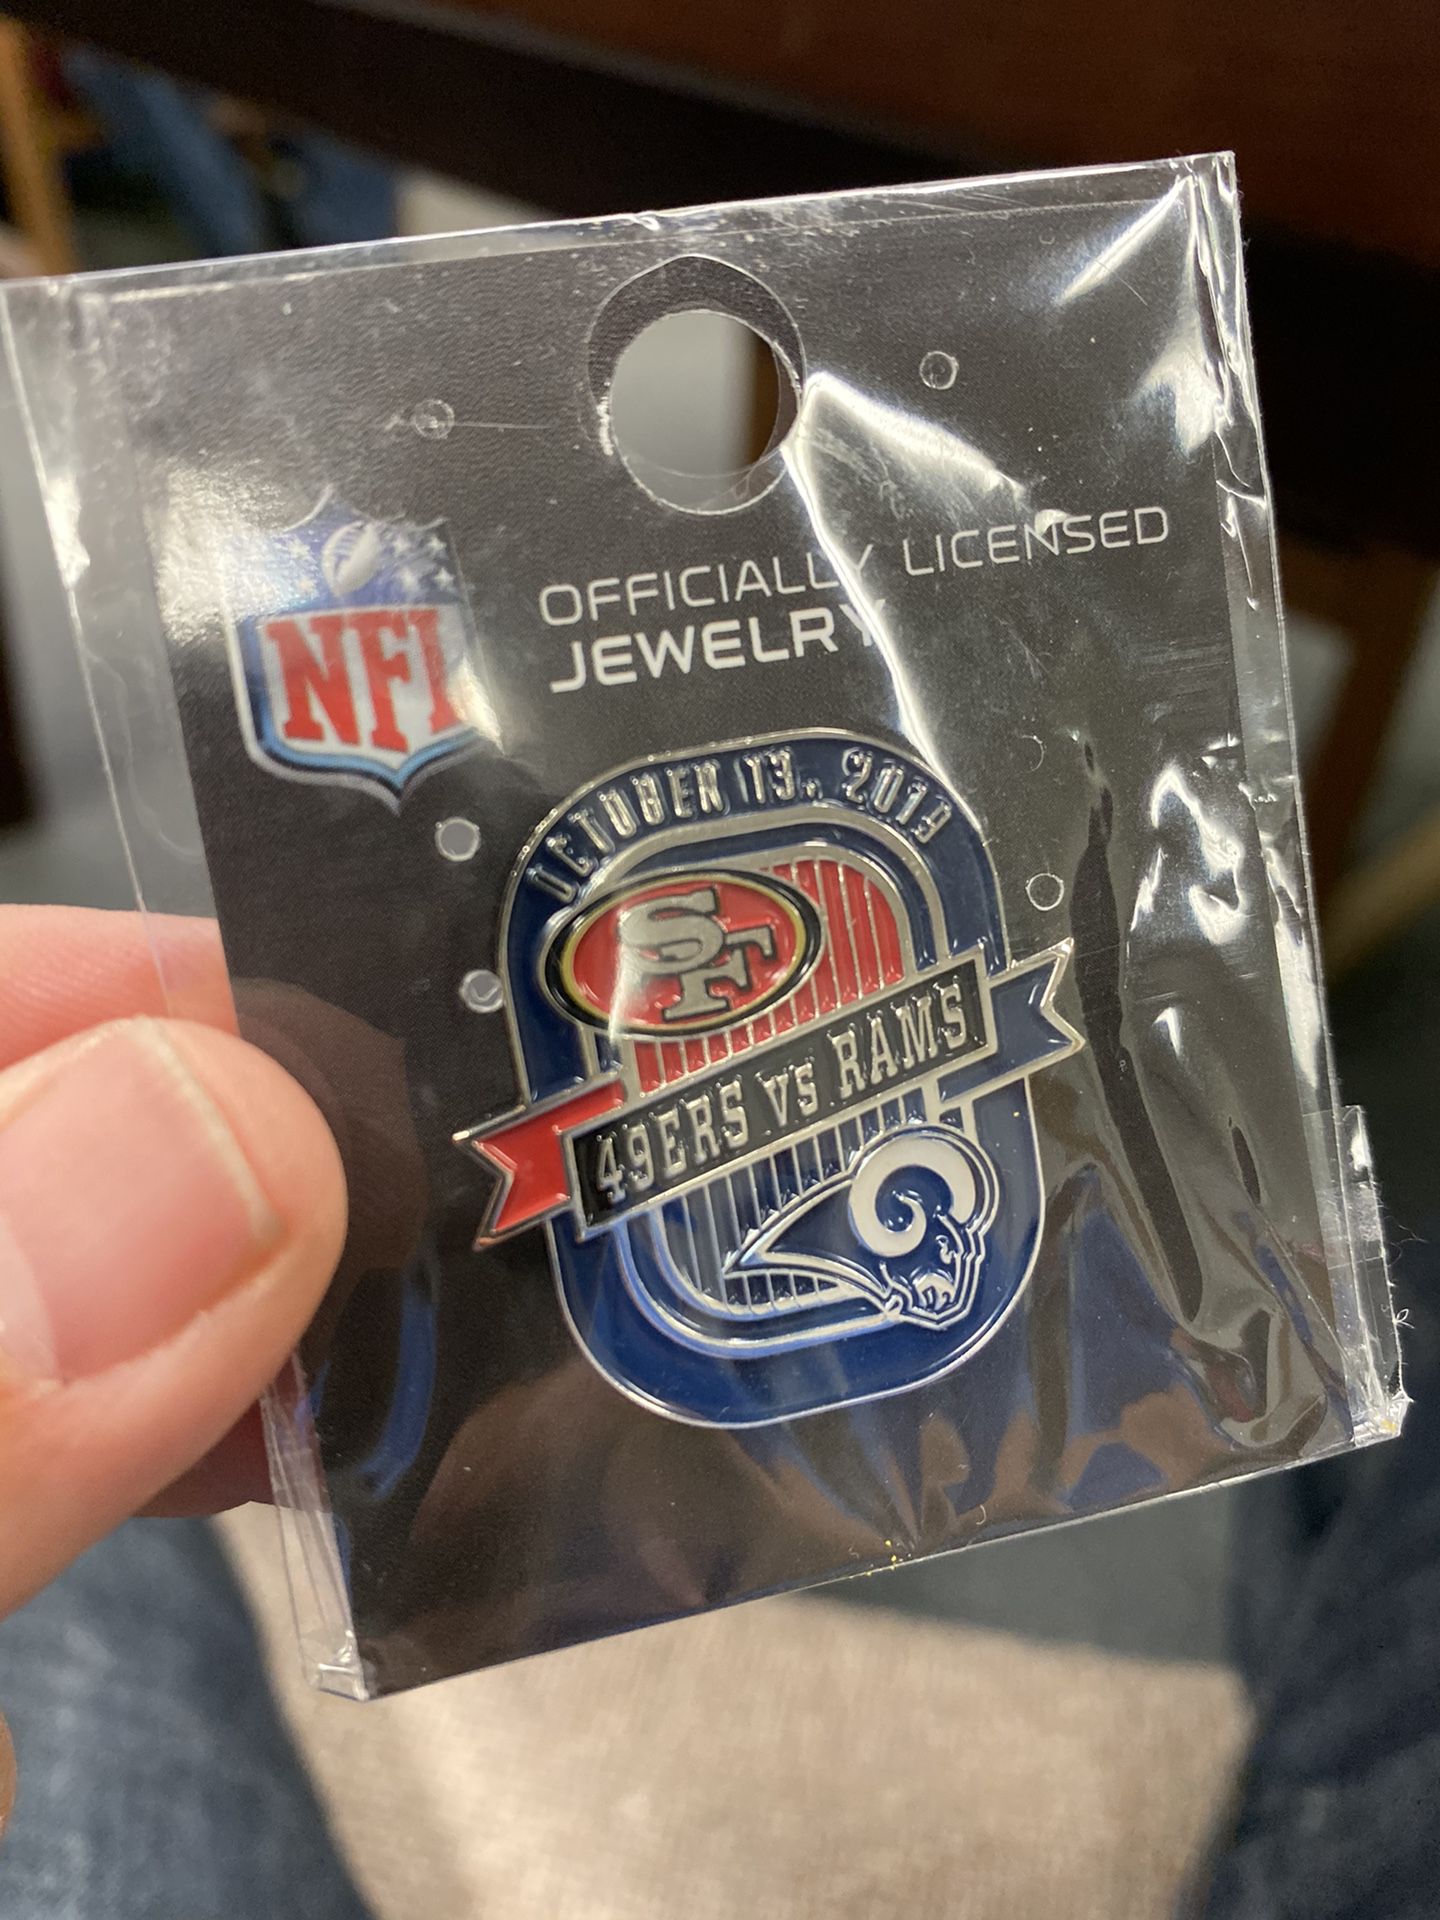 NFL 49ers vs Rams Game Pin Officially Licensed Jewelry